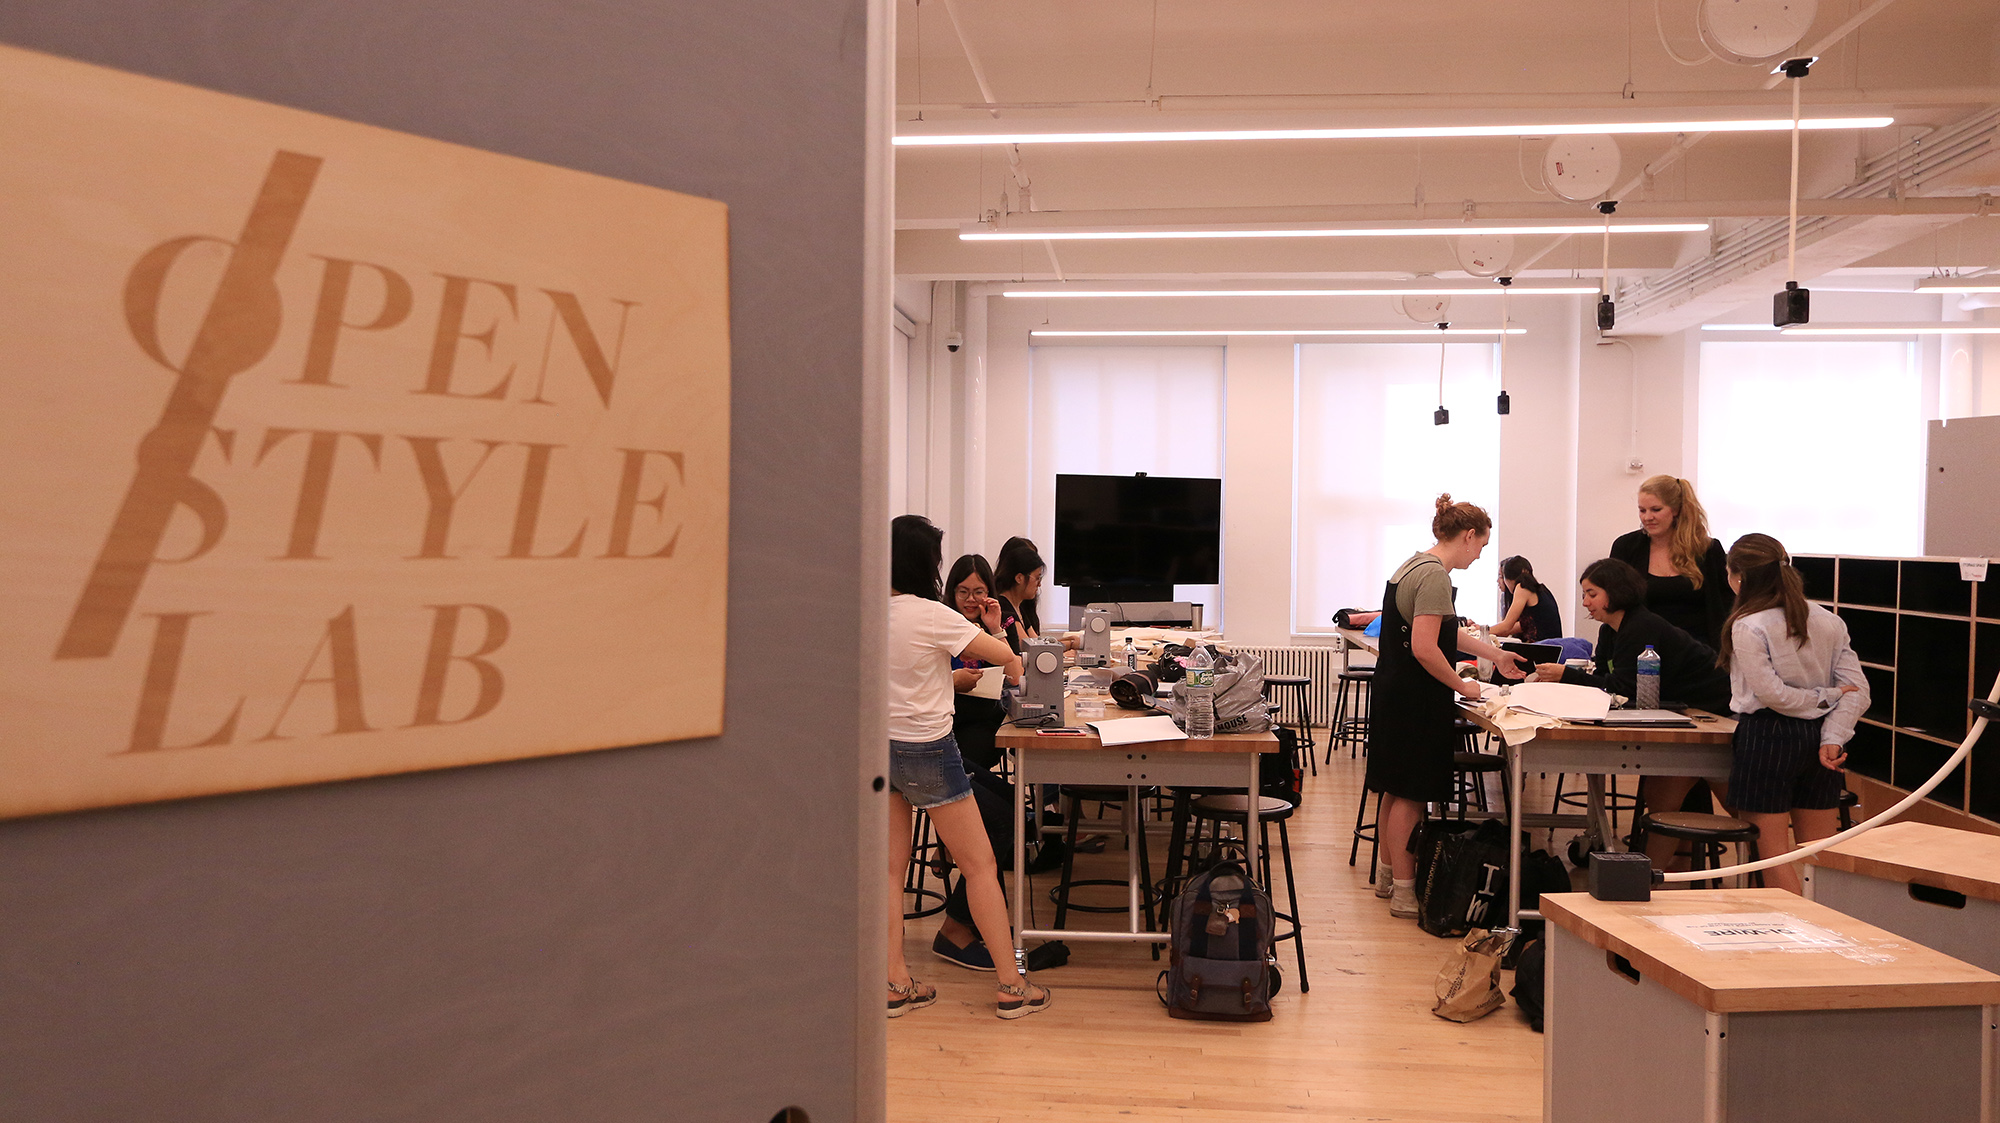 Open Style Lab Parsons